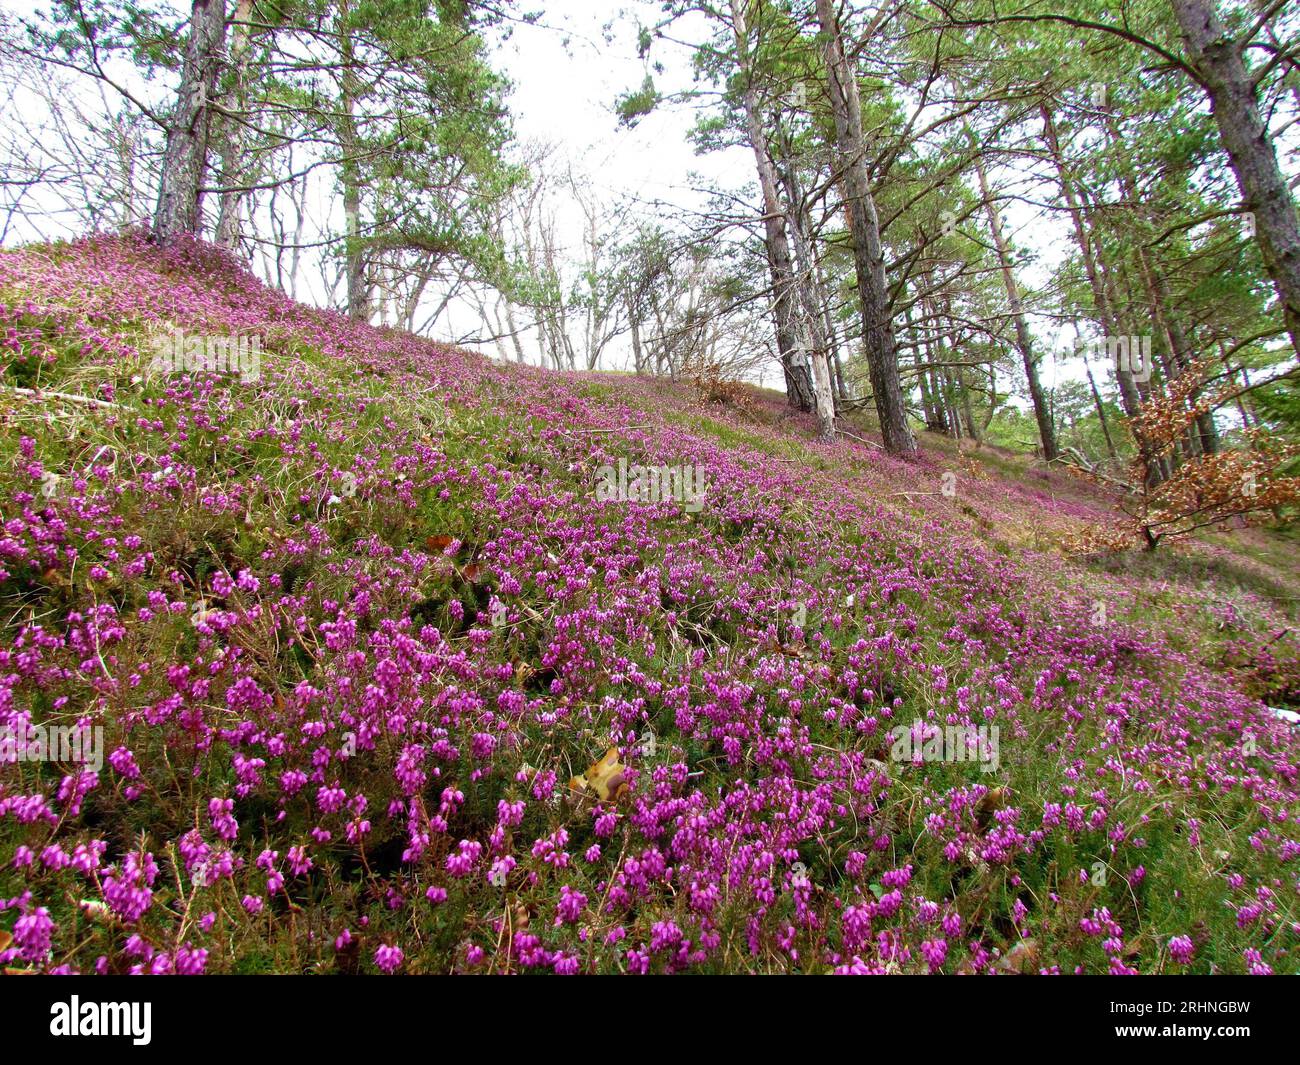 Pink winter heath flowers covering the ground in a european red pine (Pinus sylvestris) forest Stock Photo